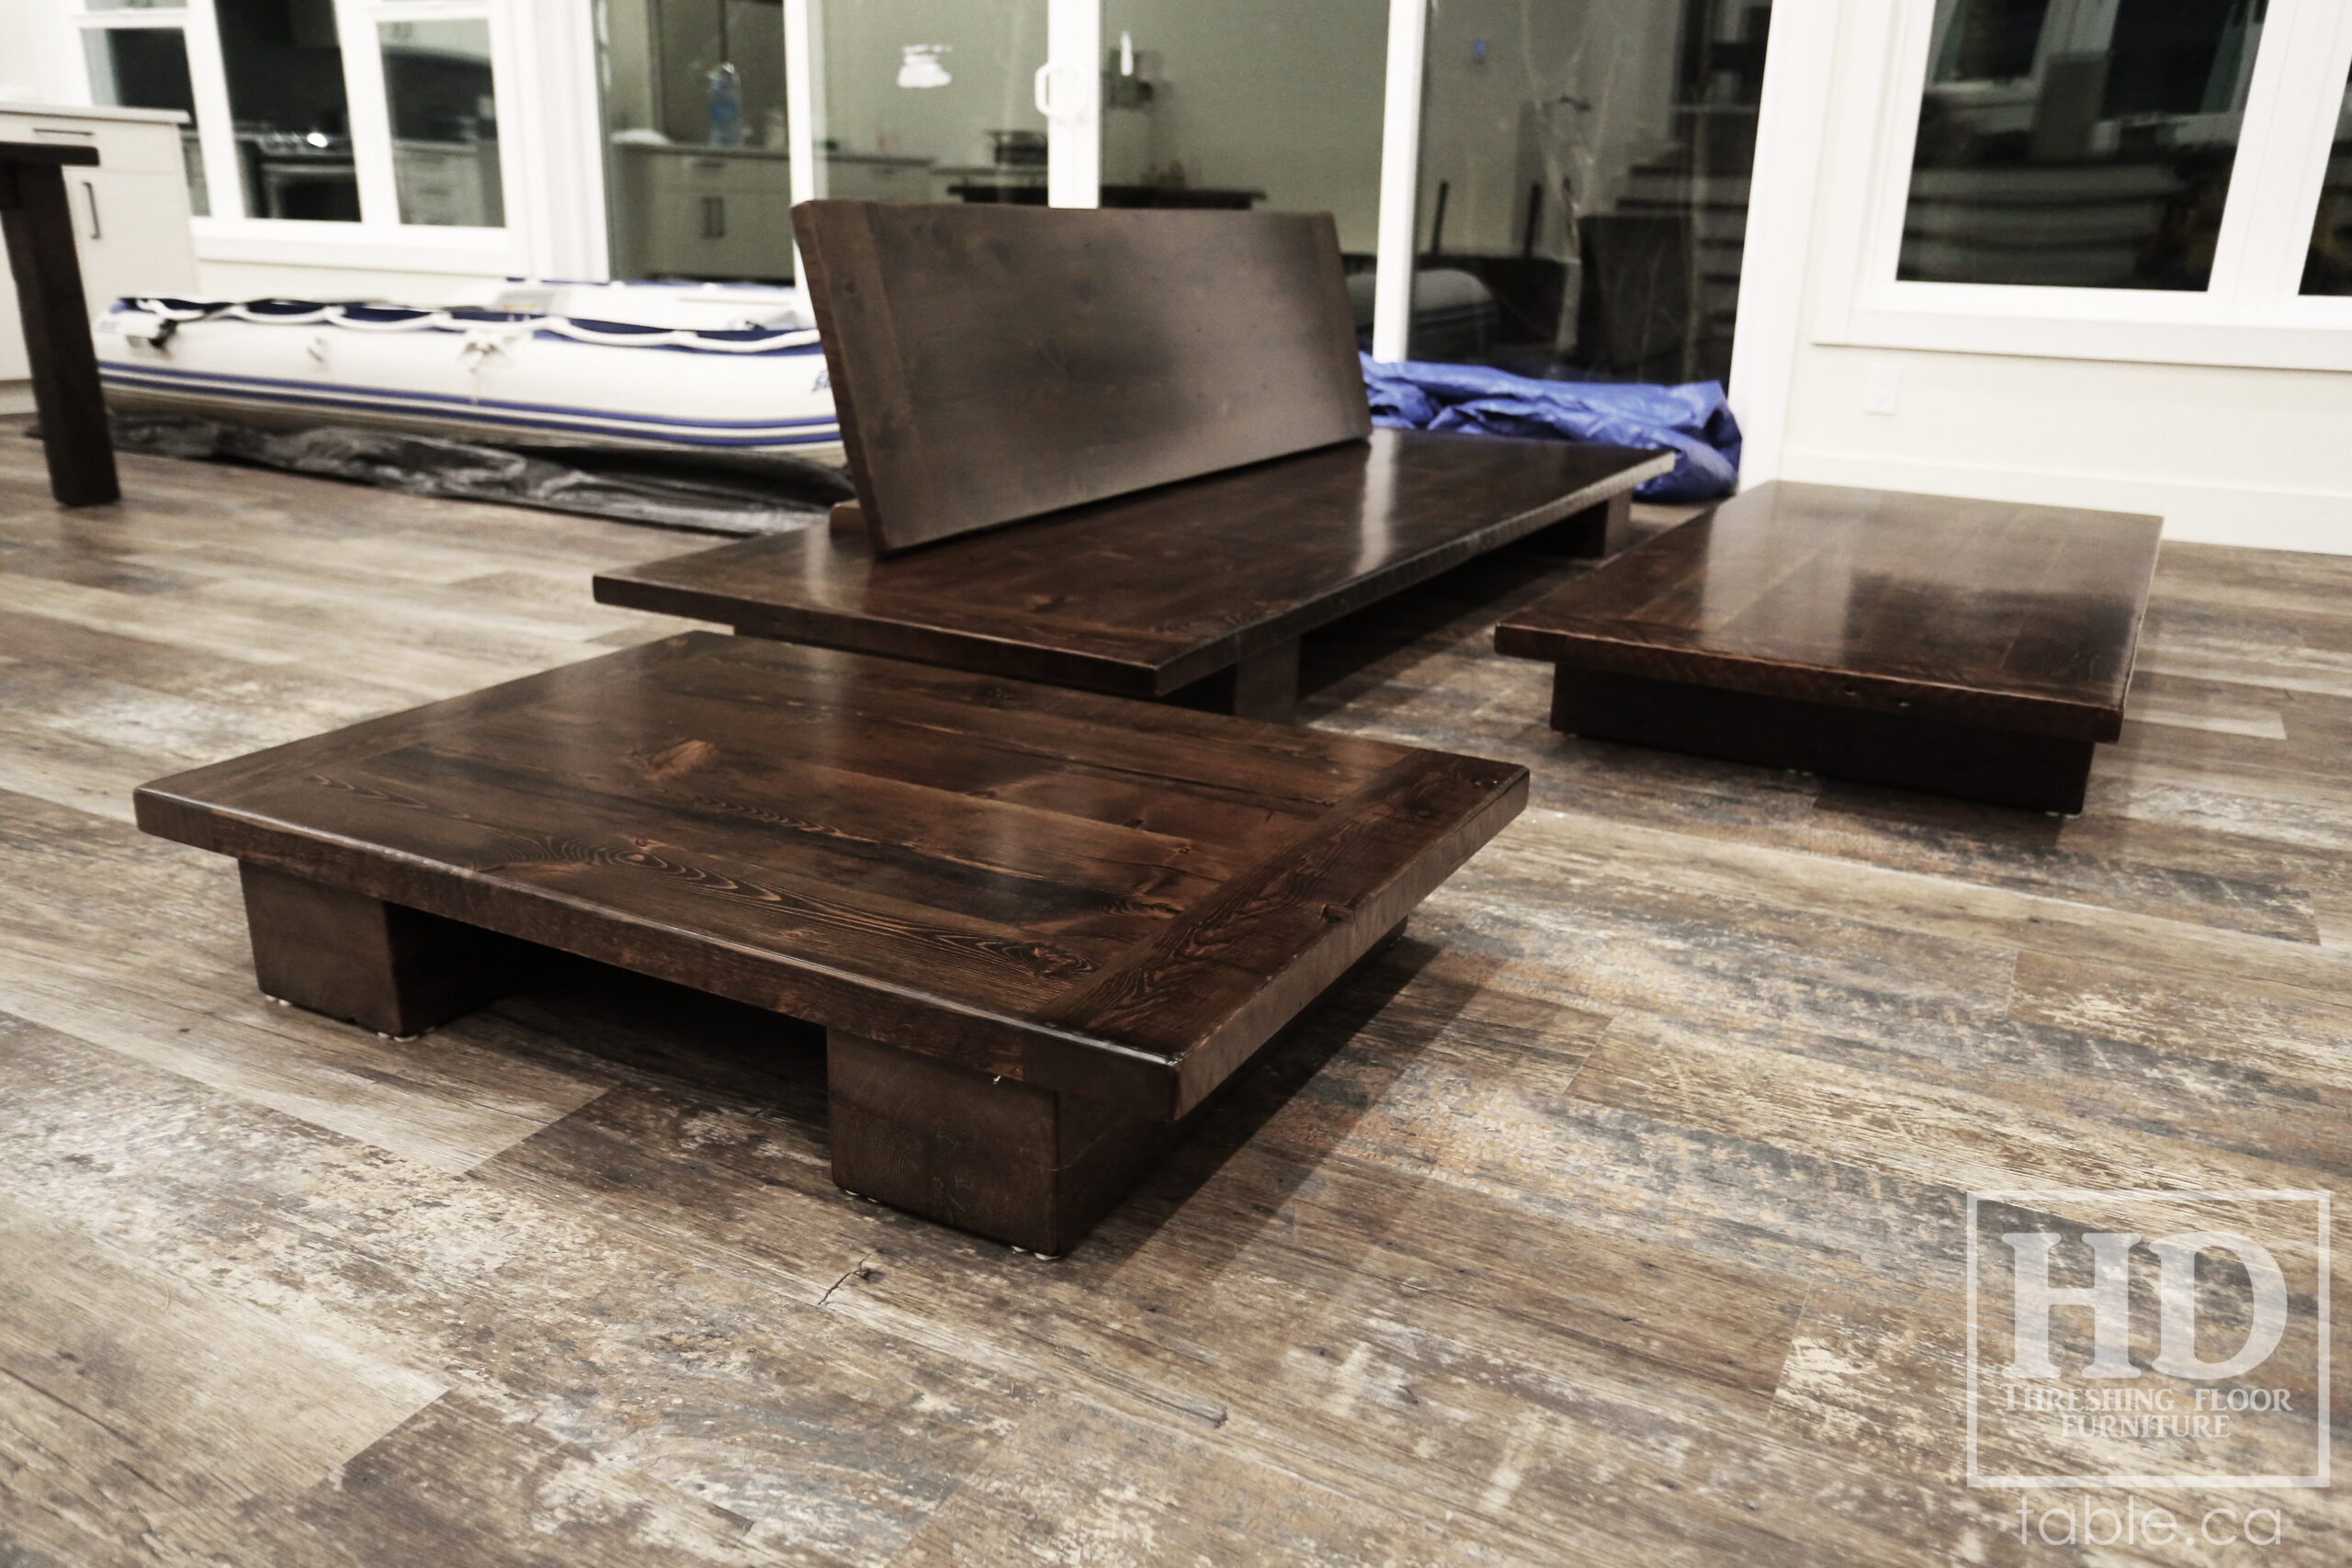 Ontario Barnwood Platform Style Coffee Tables we made for a Parry Sound home - 42"  x29" & 5'6" x 29" - 8" height  - Reclaimed Old Growth Hemlock Threshing Floor Construction - Original edges & distressing maintained - Black Stain Option - Premium epoxy + satin polyurethane finish - www.table.ca